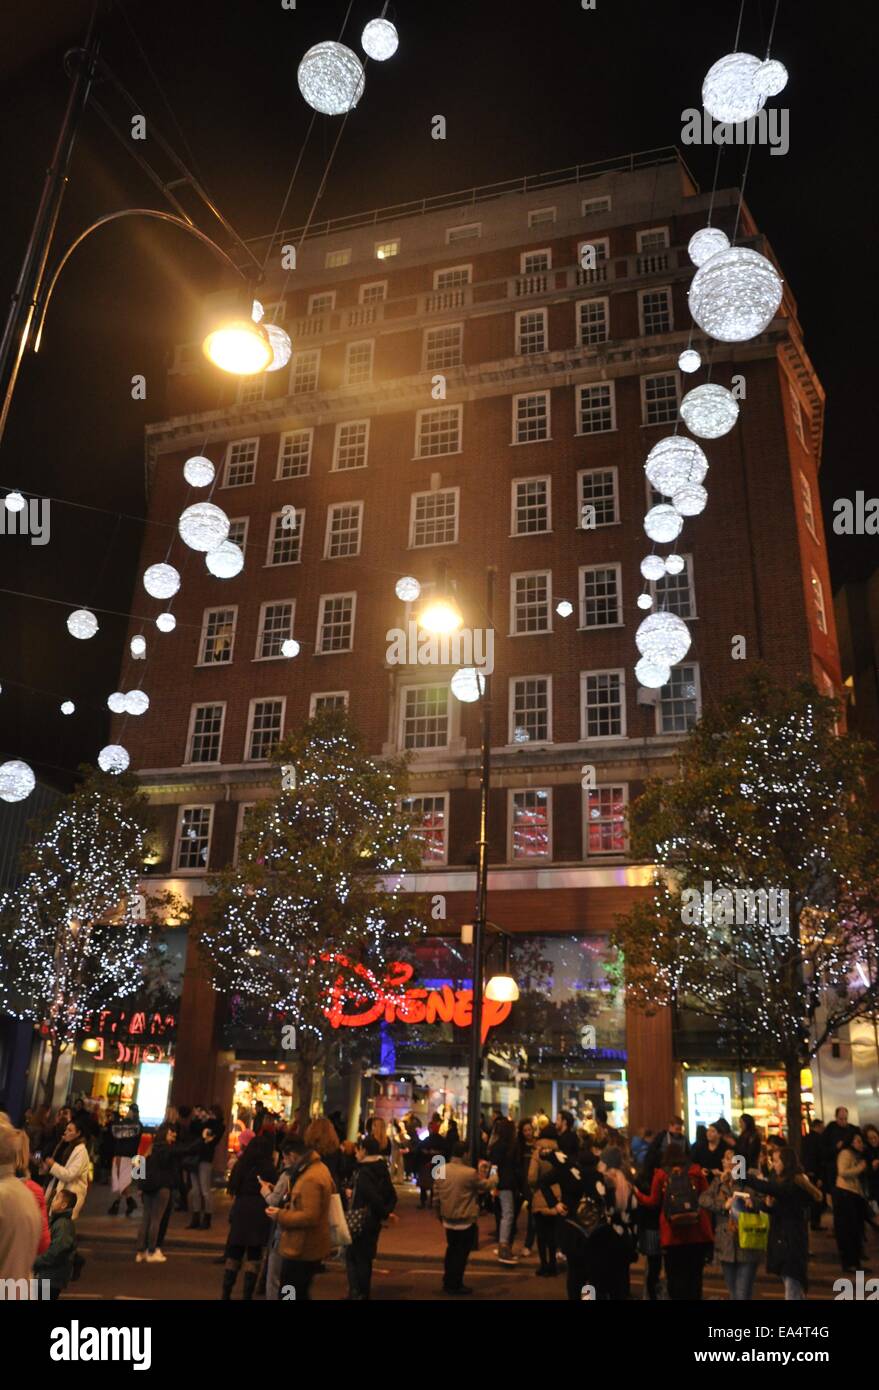 Shoppers Outside Oxford Street Disney Store with Christmas Lights at Night Time, London Stock Photo